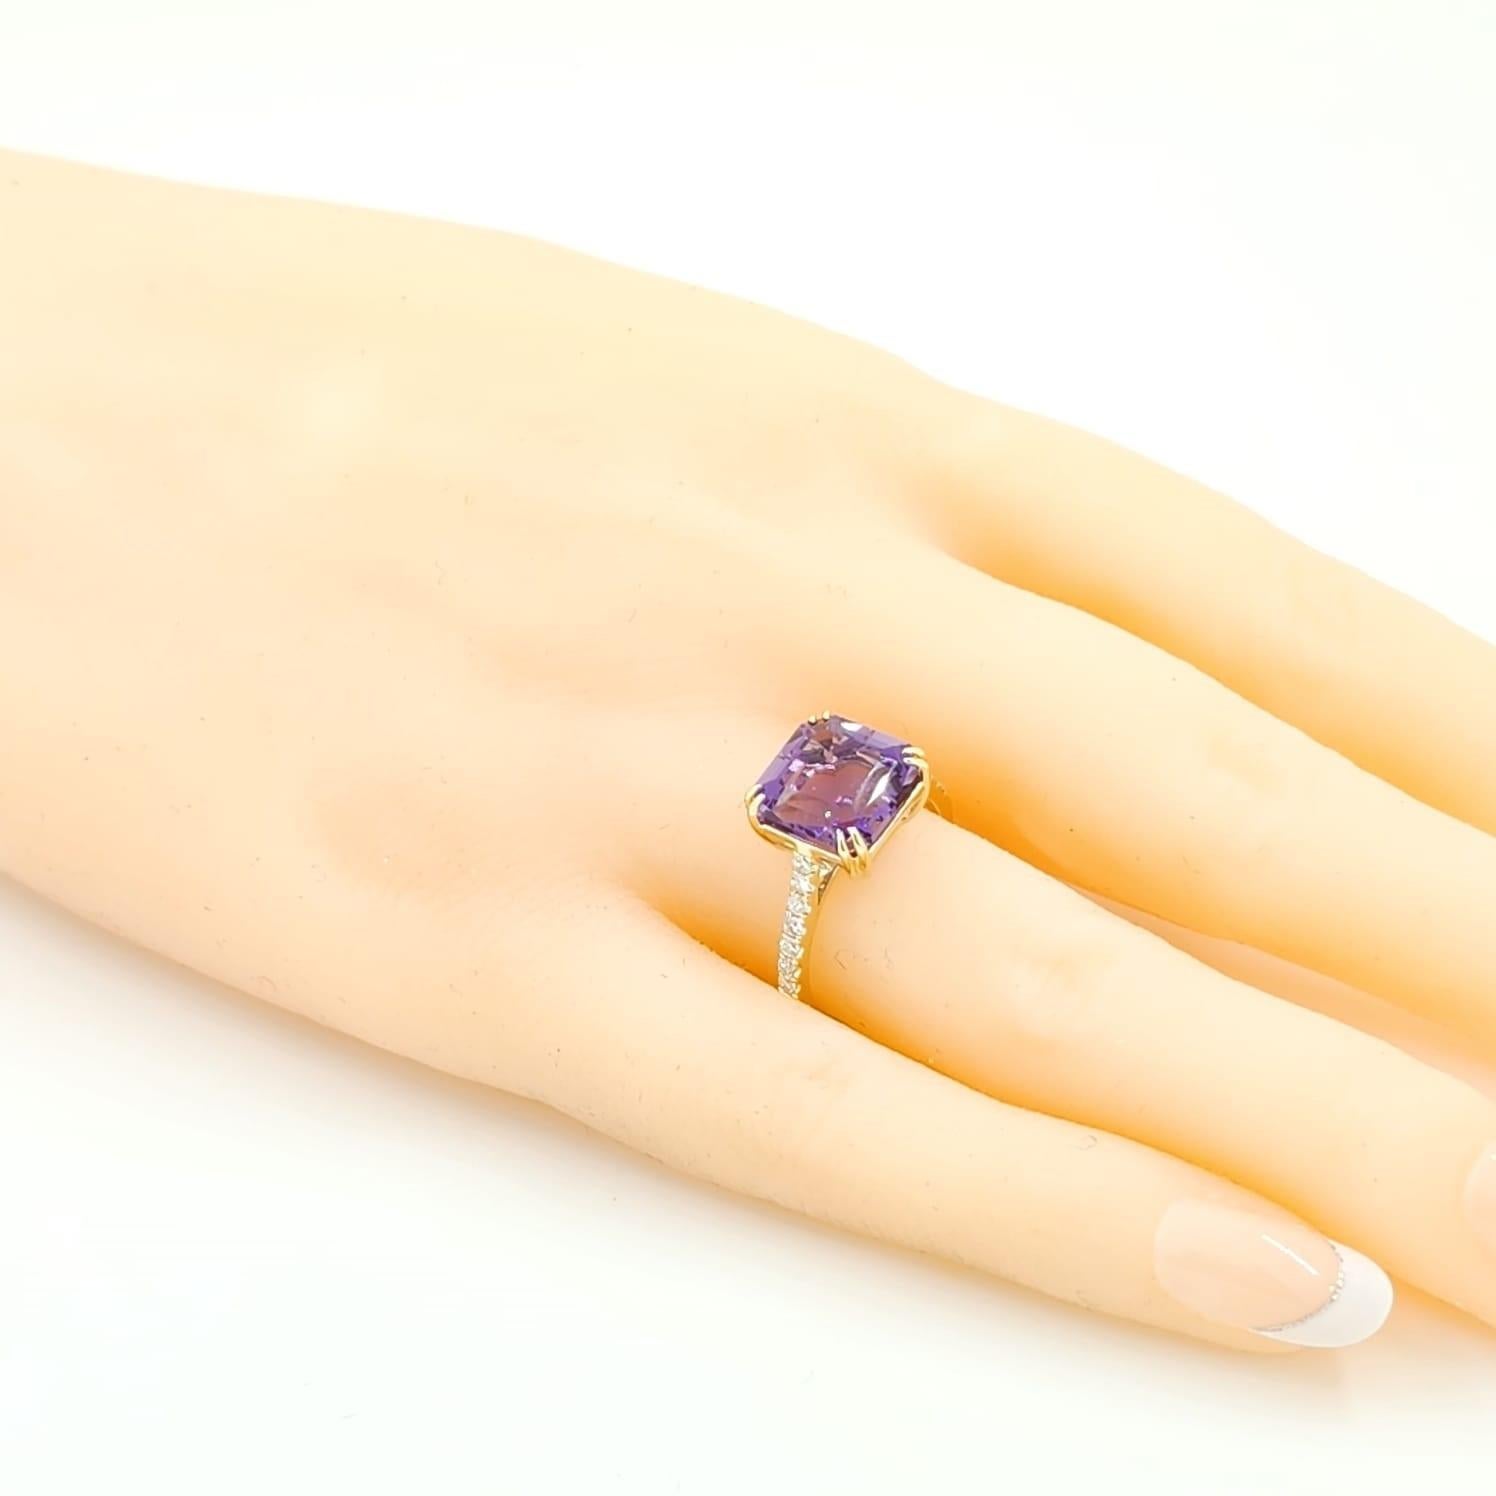 4.49Ct  Asscher Cut Amethyst Diamond Ring in 14K Yellow Gold For Sale 2